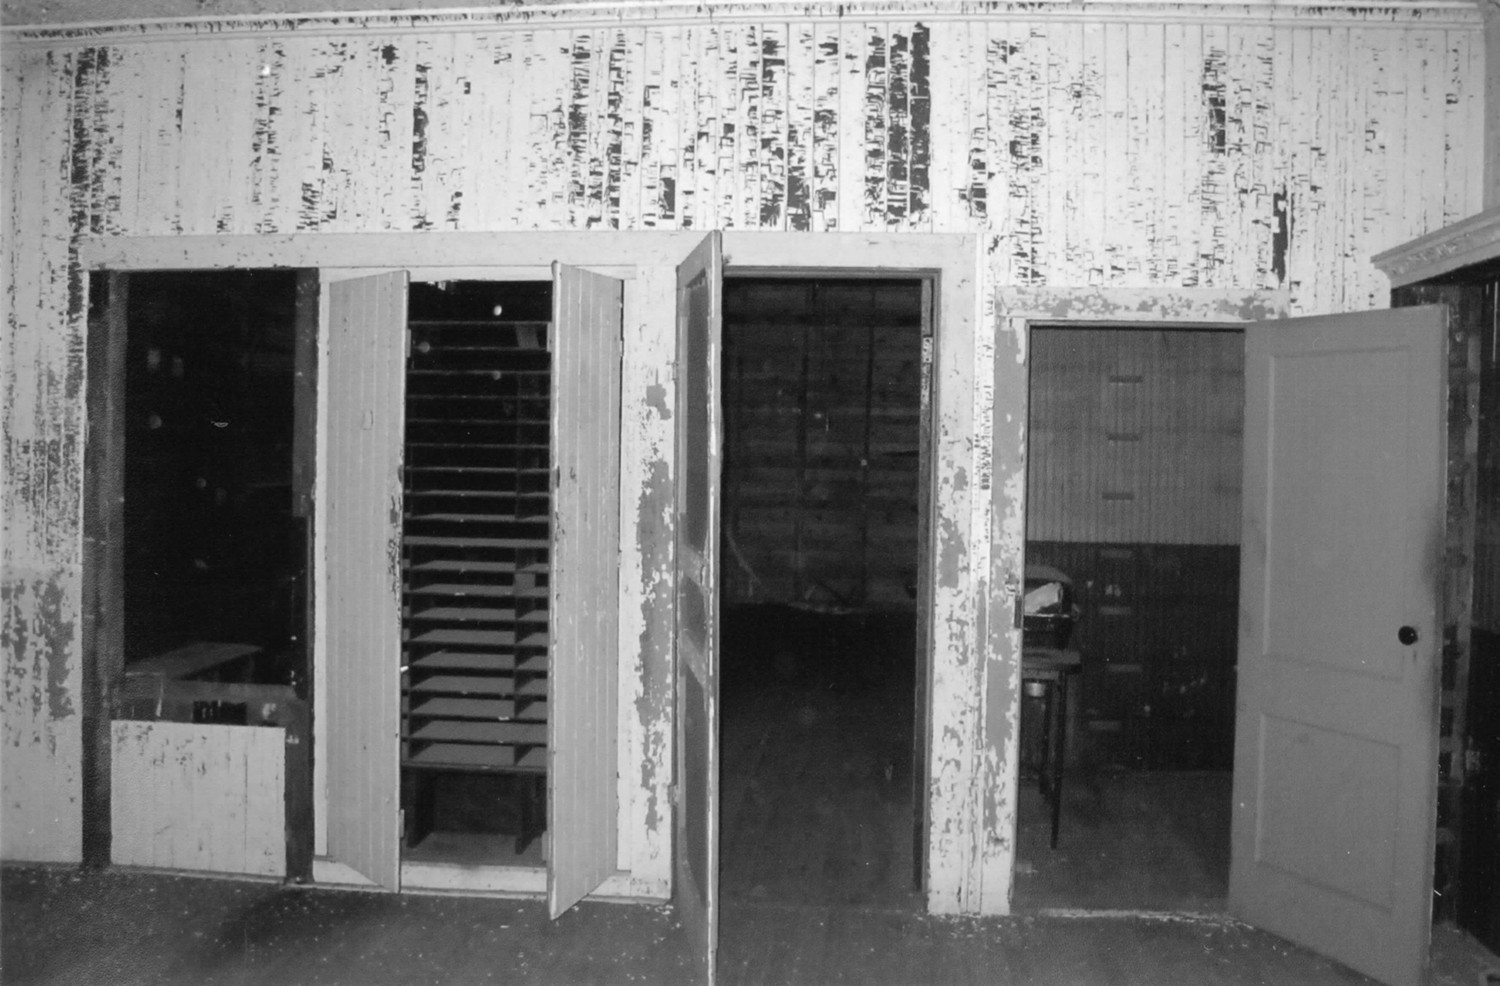 Wheeling and Lake Erie Railroad Depot, Lodi Ohio Interior view taken inside ticket office showing man door into baggage & freight room and pass through document cabinet (2012)